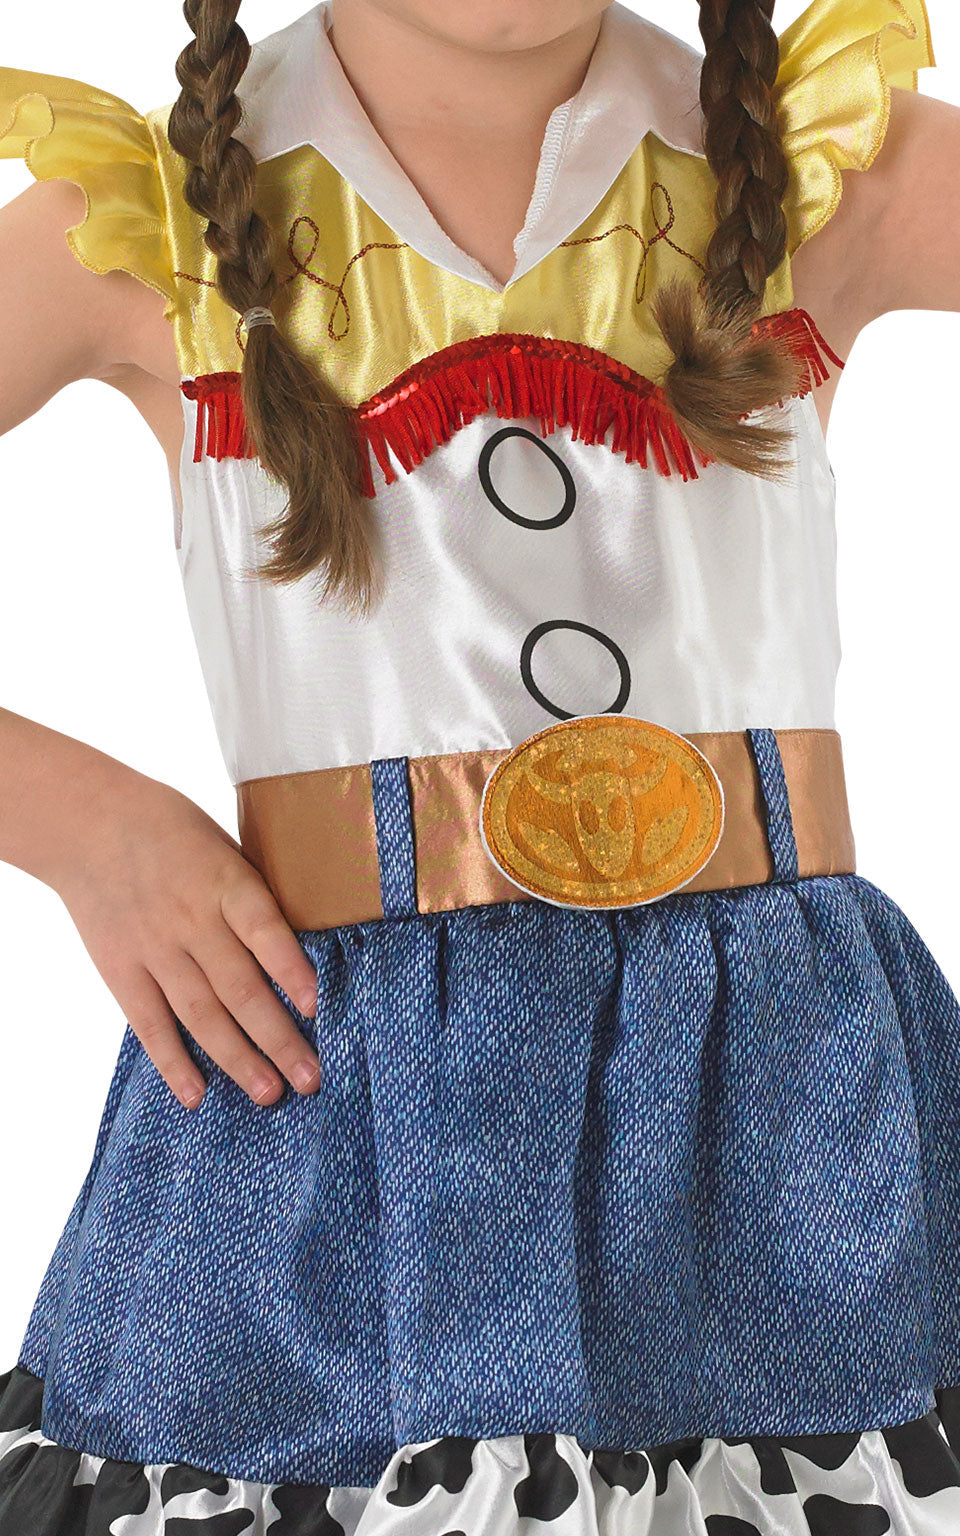 Swapping her chaps for a skirt, Toy Storys yodelling cowgirl is ready to round up cattle and more. Toy Story Jessie Fancy Dress Costume includes dress and glitter hat.